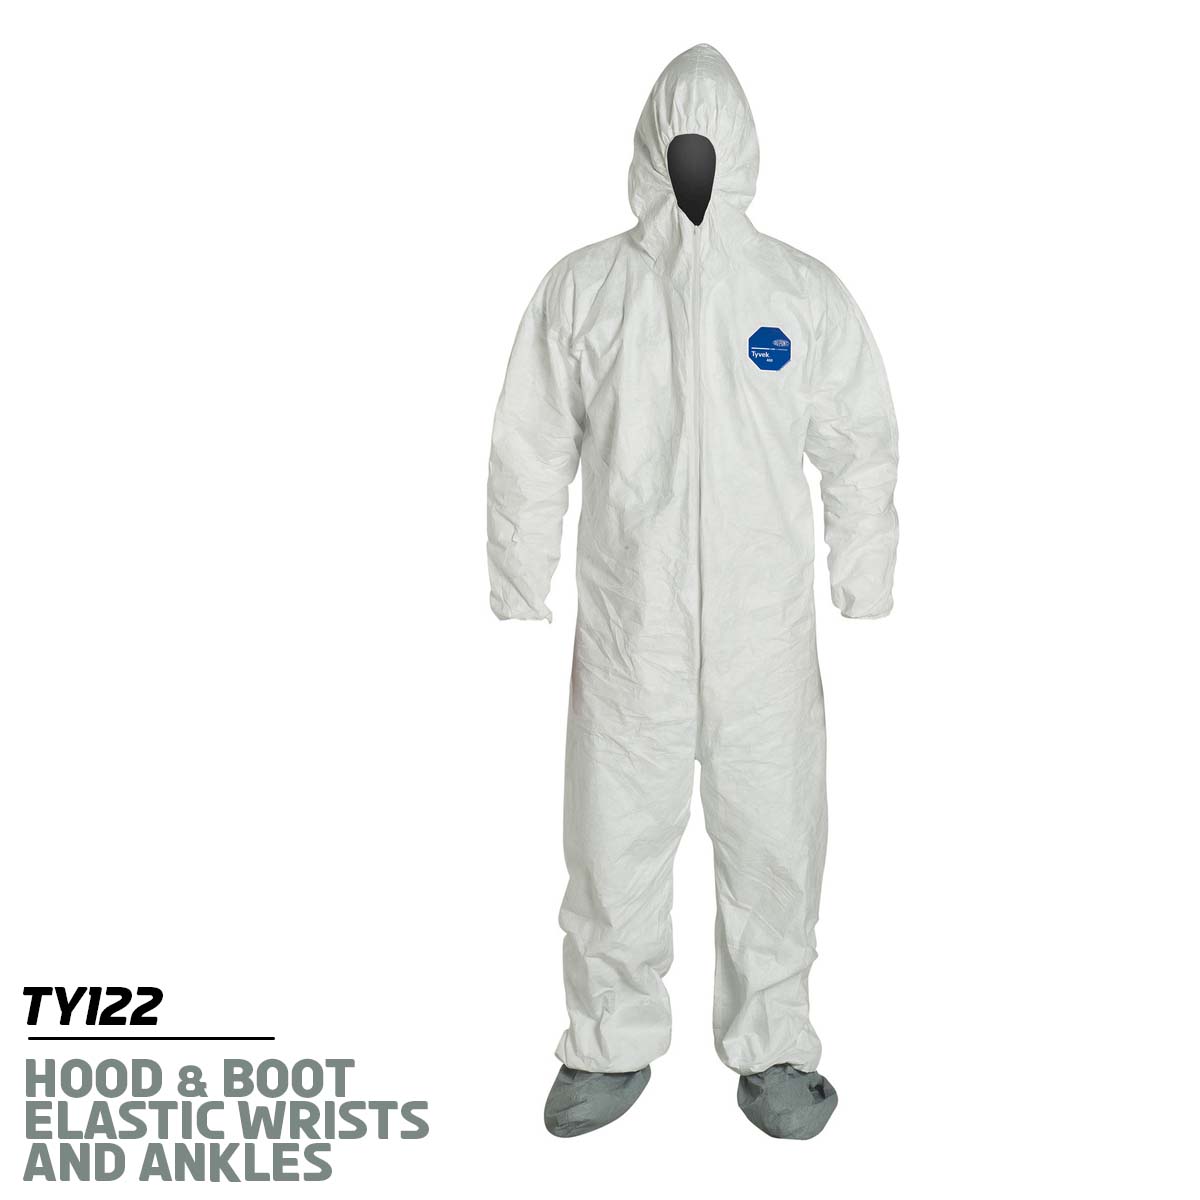 Attached Hood and Boots / Elastic Wrists / Ankles / Medium DuPont™ White Tyvek® 400 Disposable Coveralls Work Safety Protective Gear